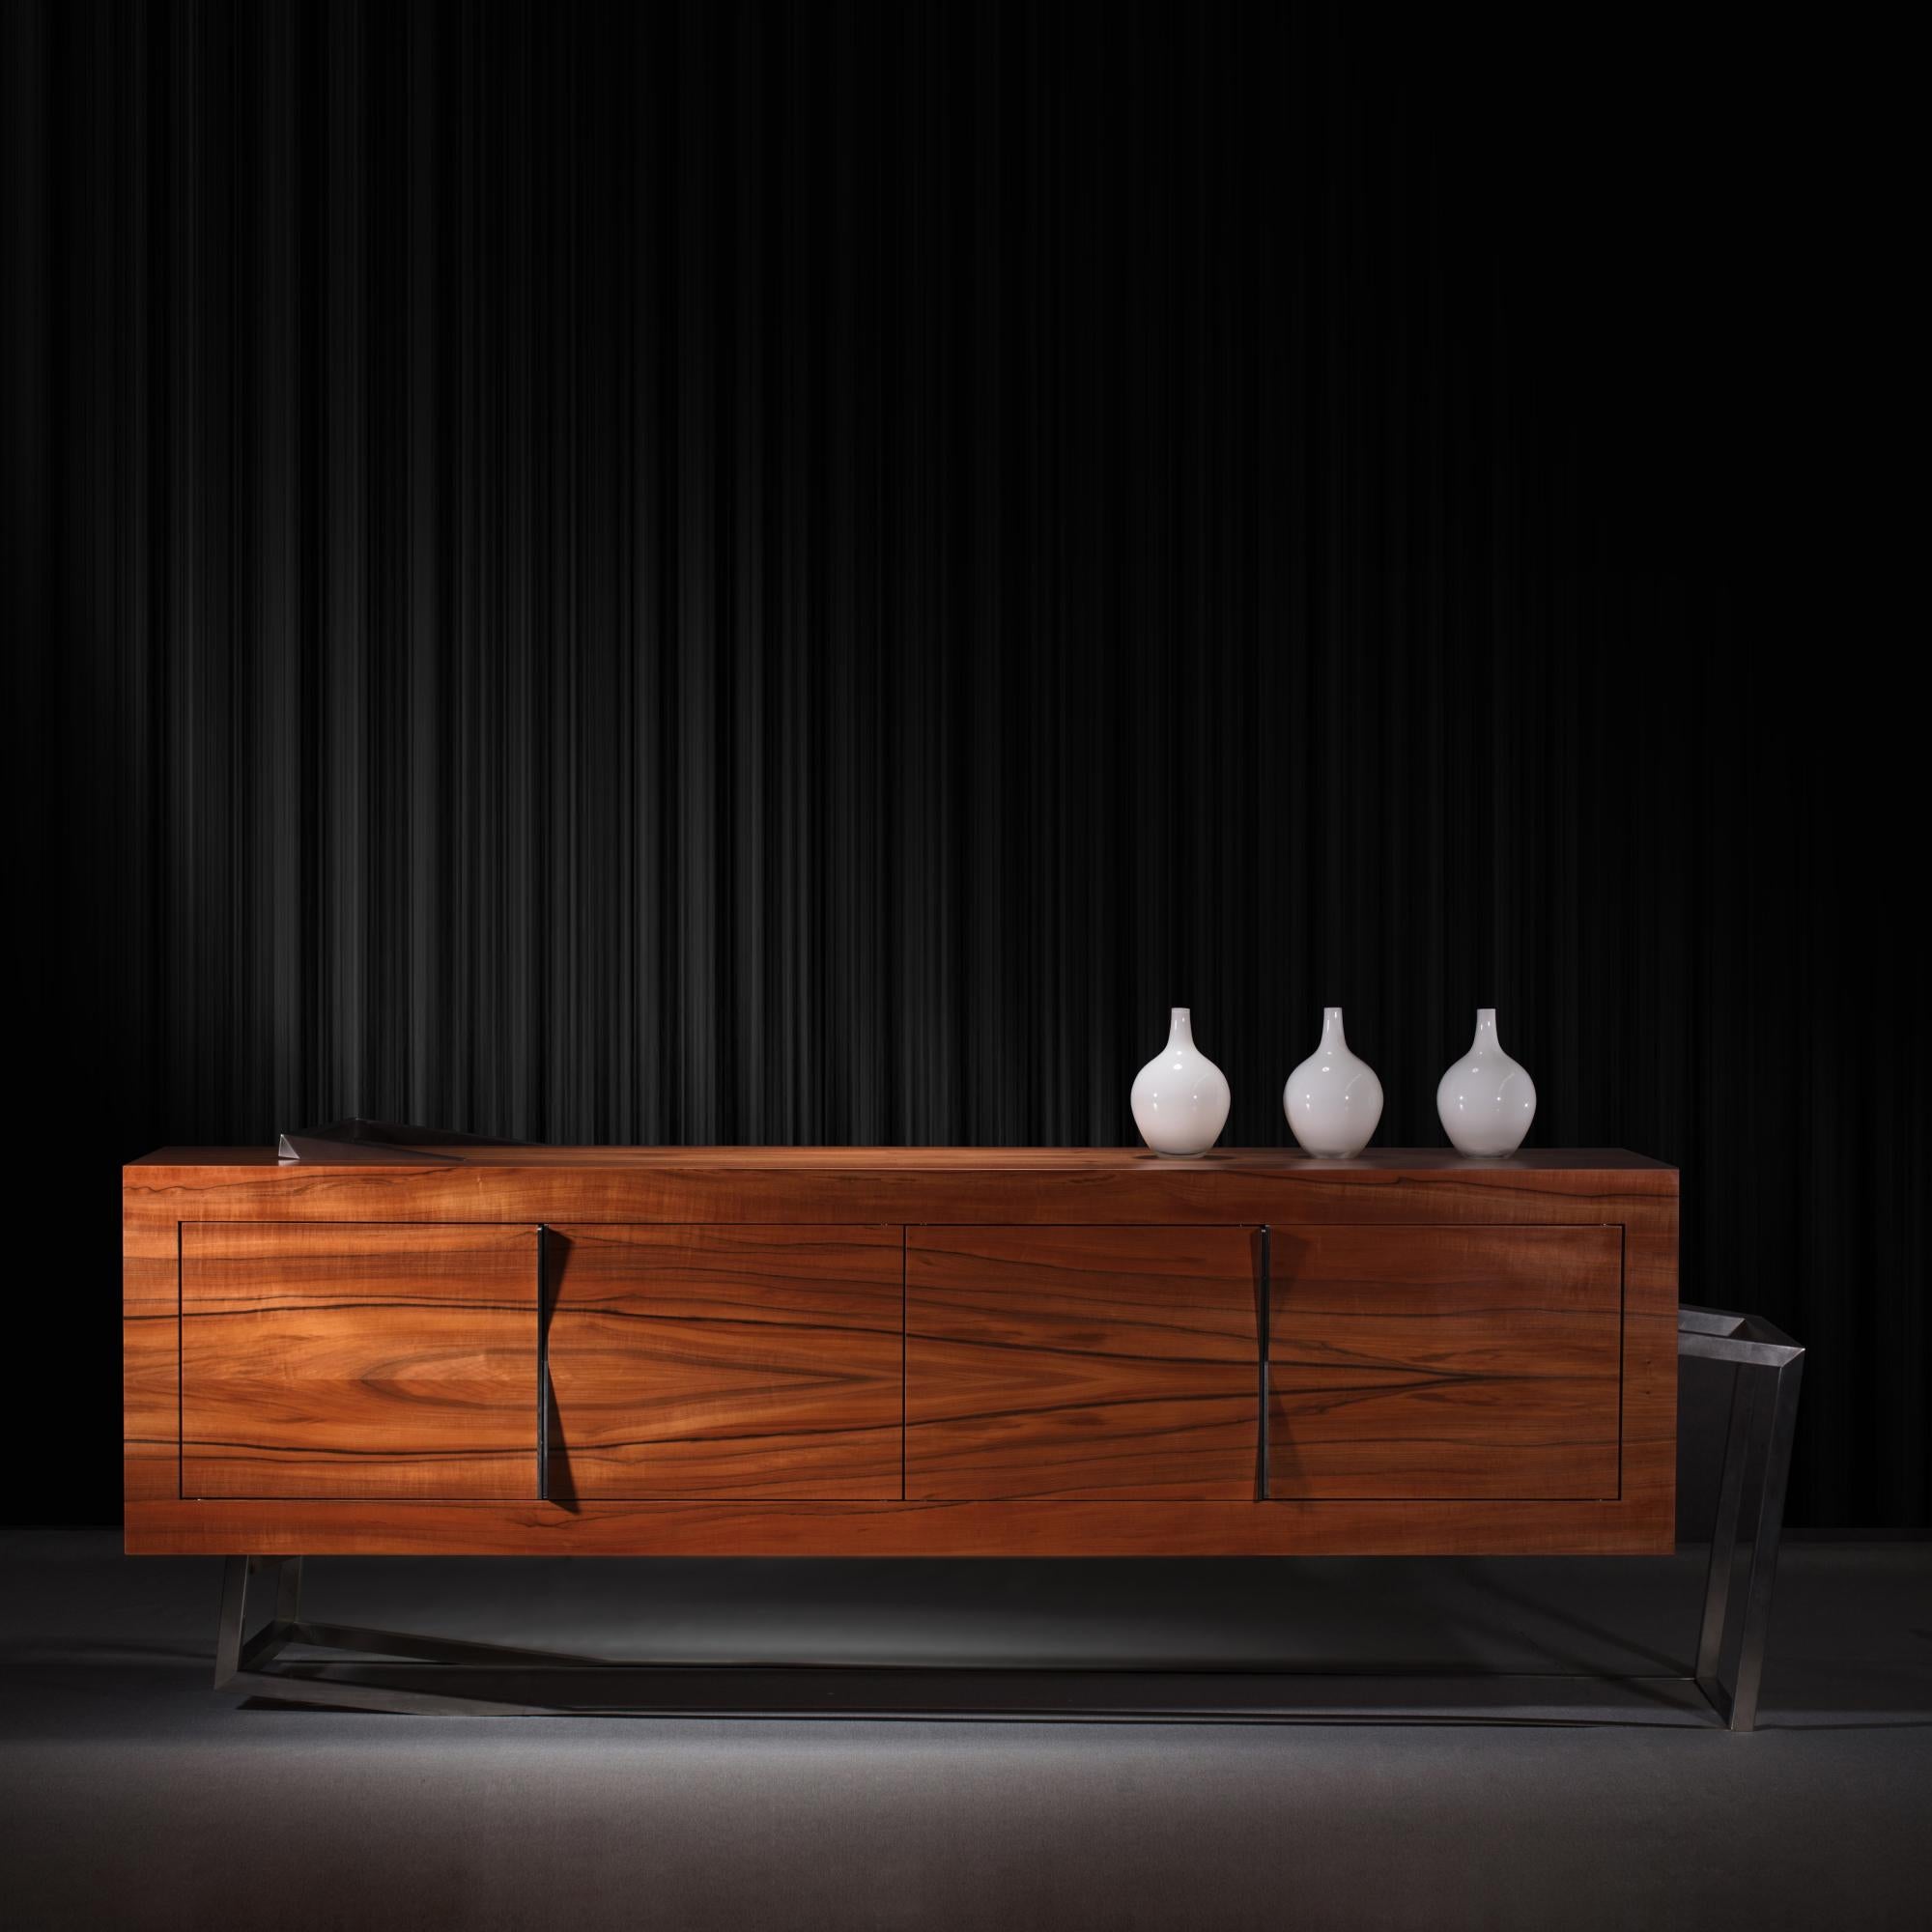 The Credenza Sideboard ExCentric 1.0 is made in tineo wood and brushed stainless steel and can be placed in a dining or office room. Its contemporary and edgy design challenges the perceptions of a usual sideboard. This piece would make the ideal